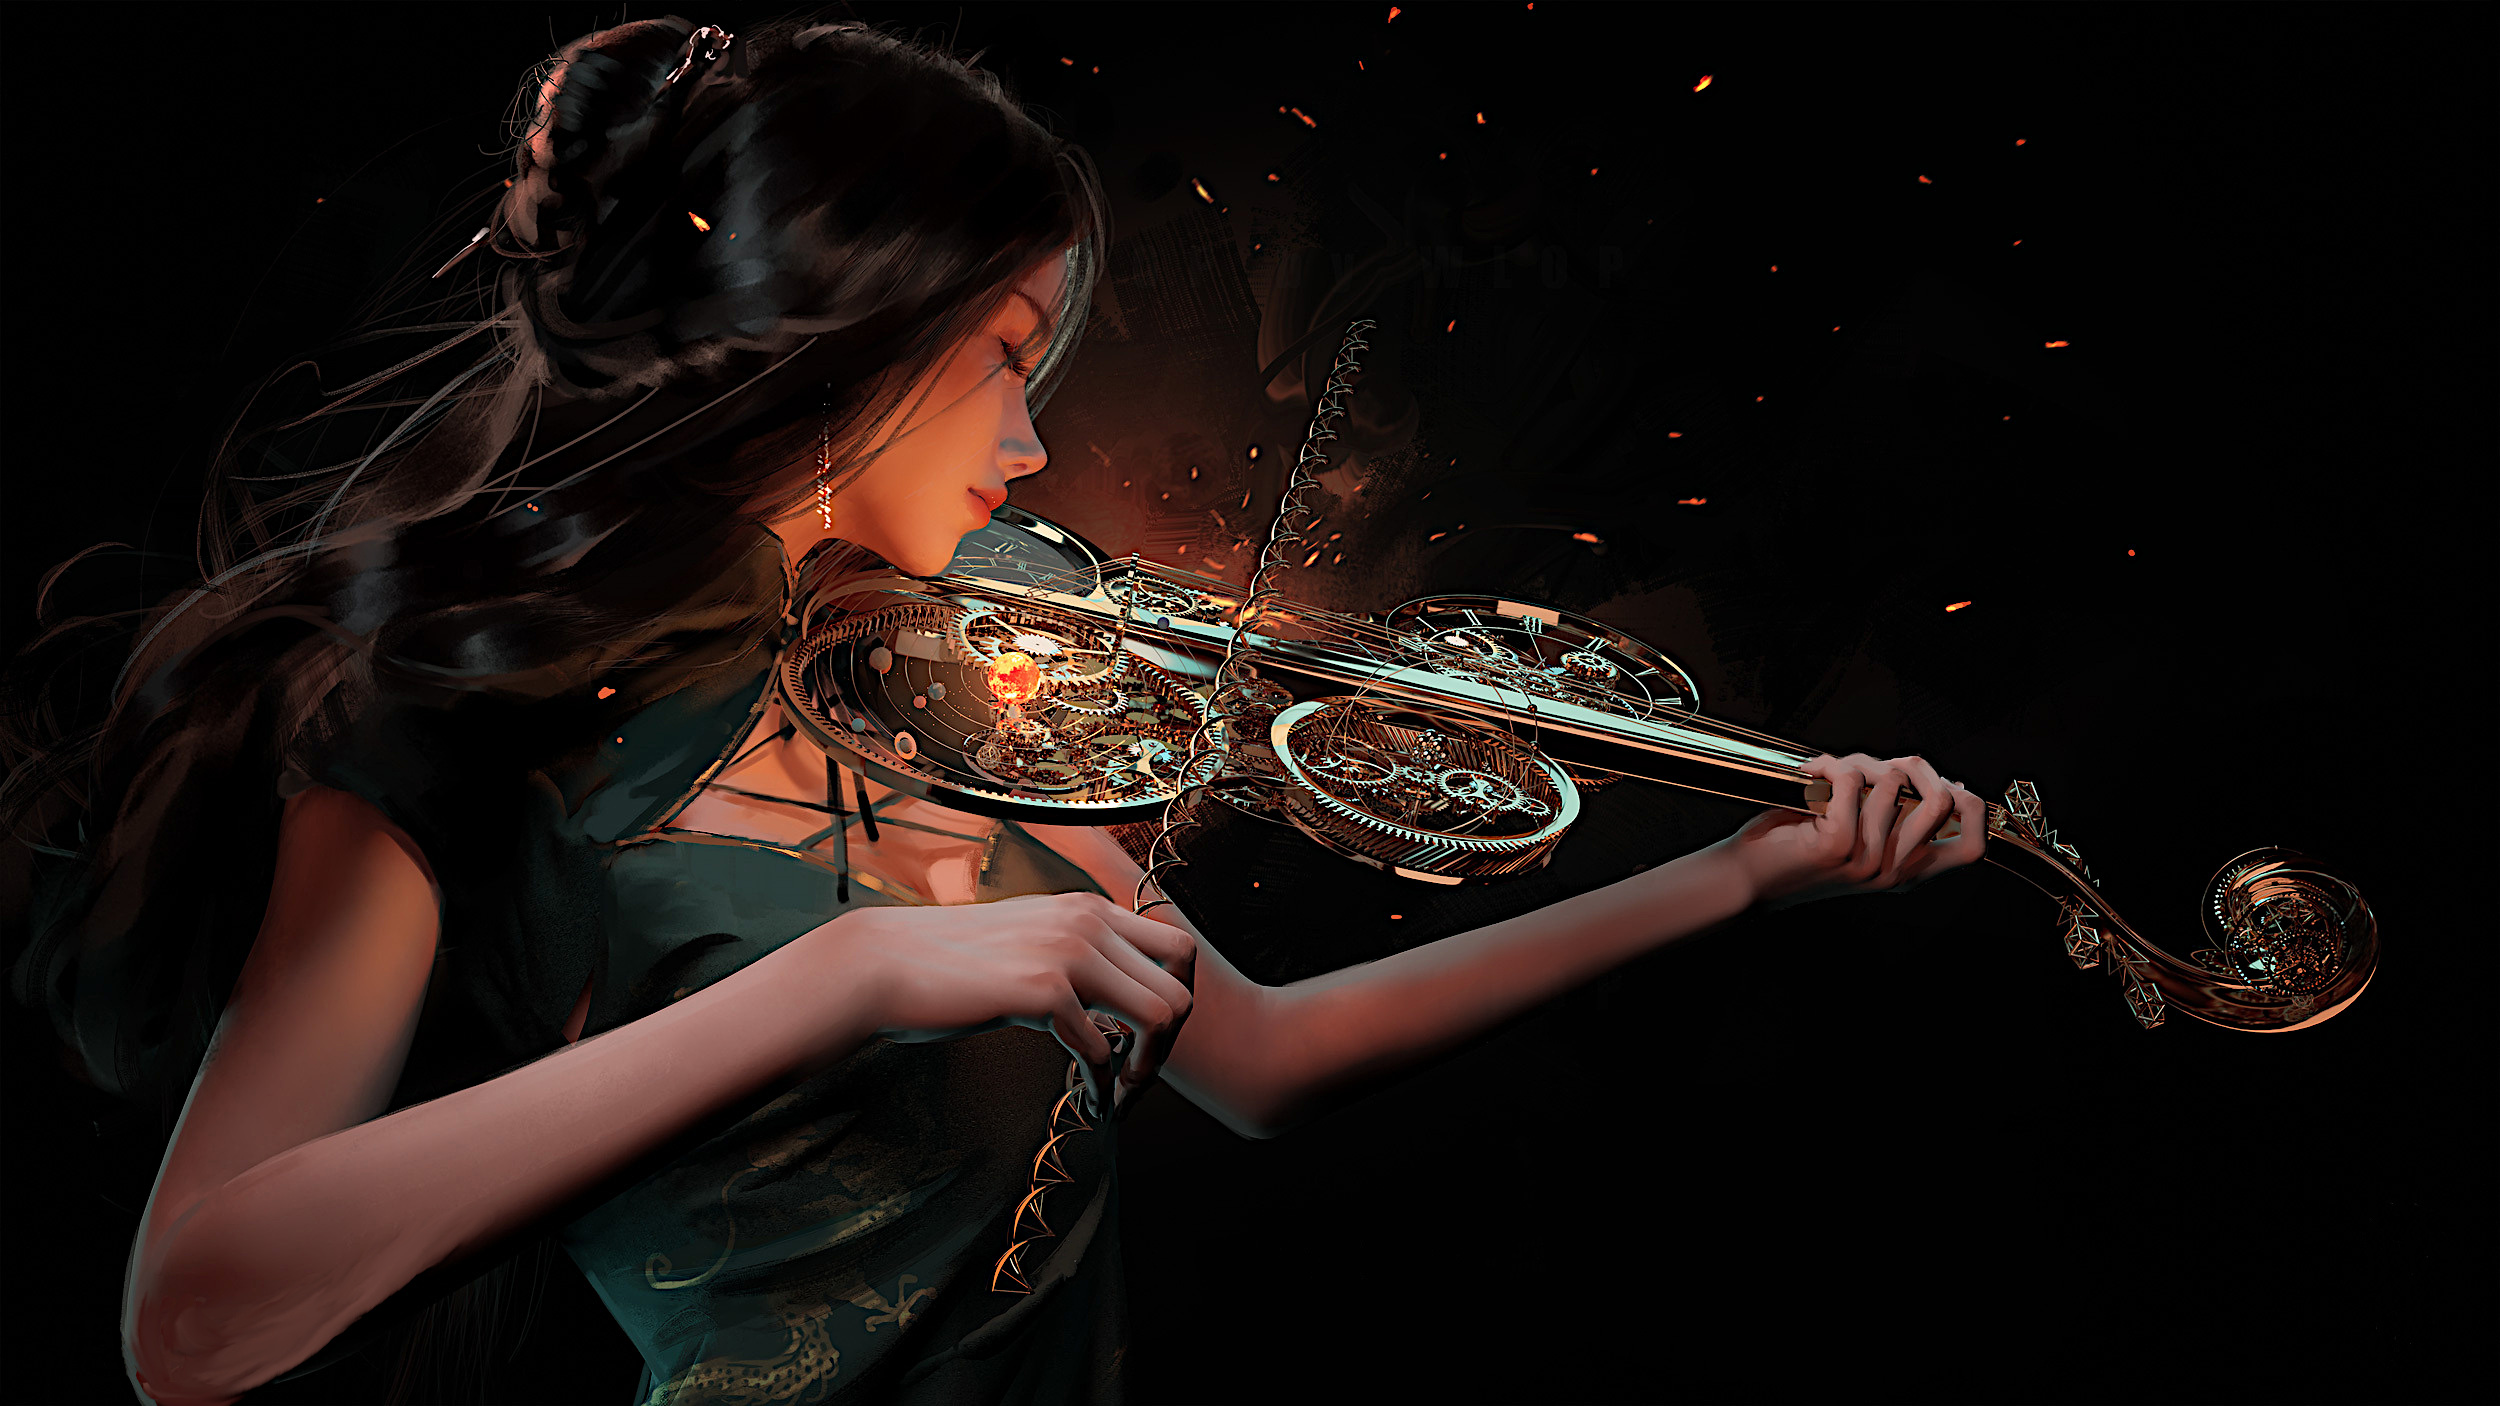 Free photo The Girl Playing the Fiery Violin